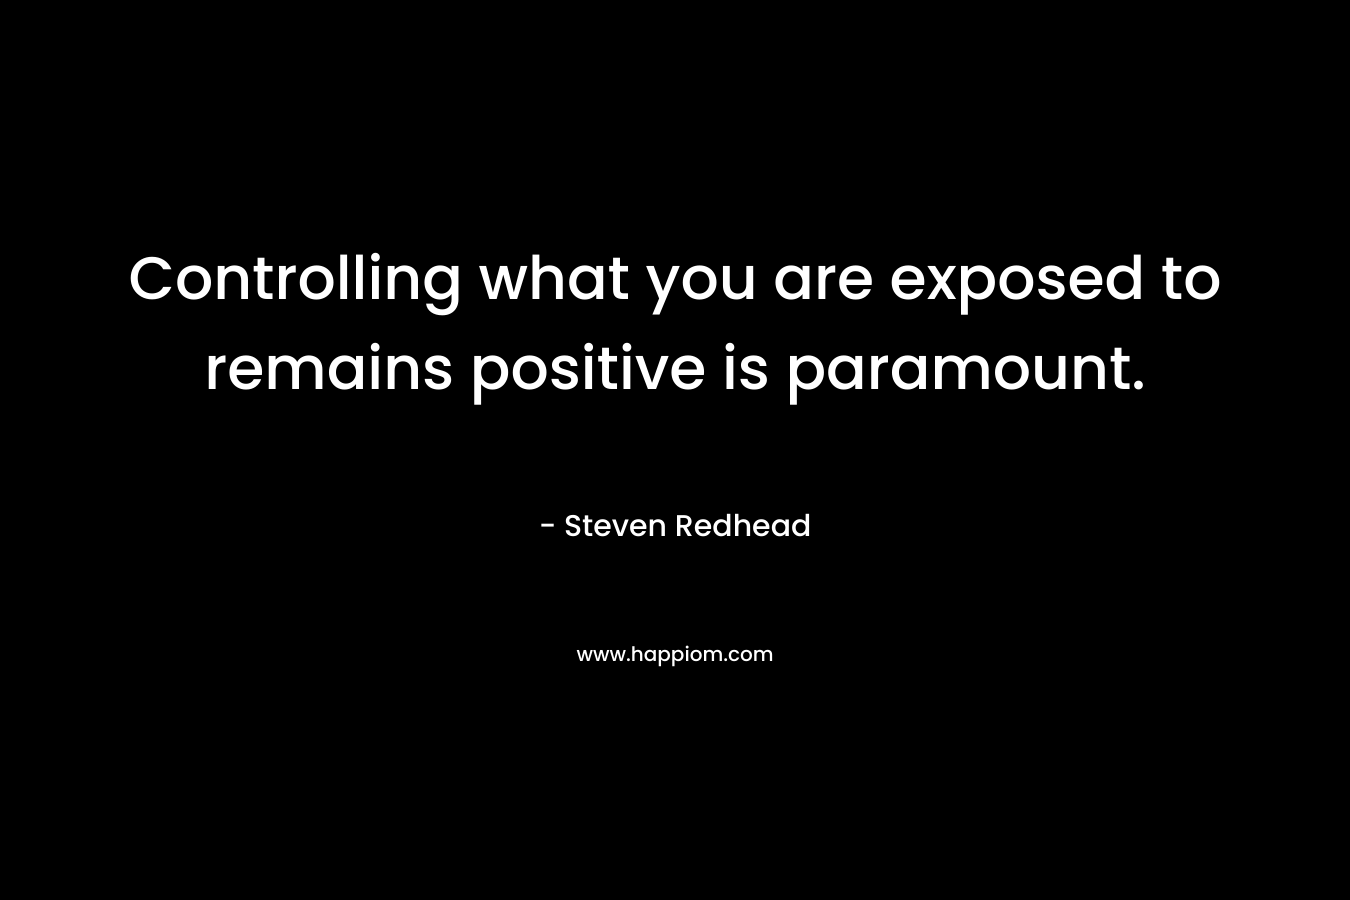 Controlling what you are exposed to remains positive is paramount. – Steven Redhead